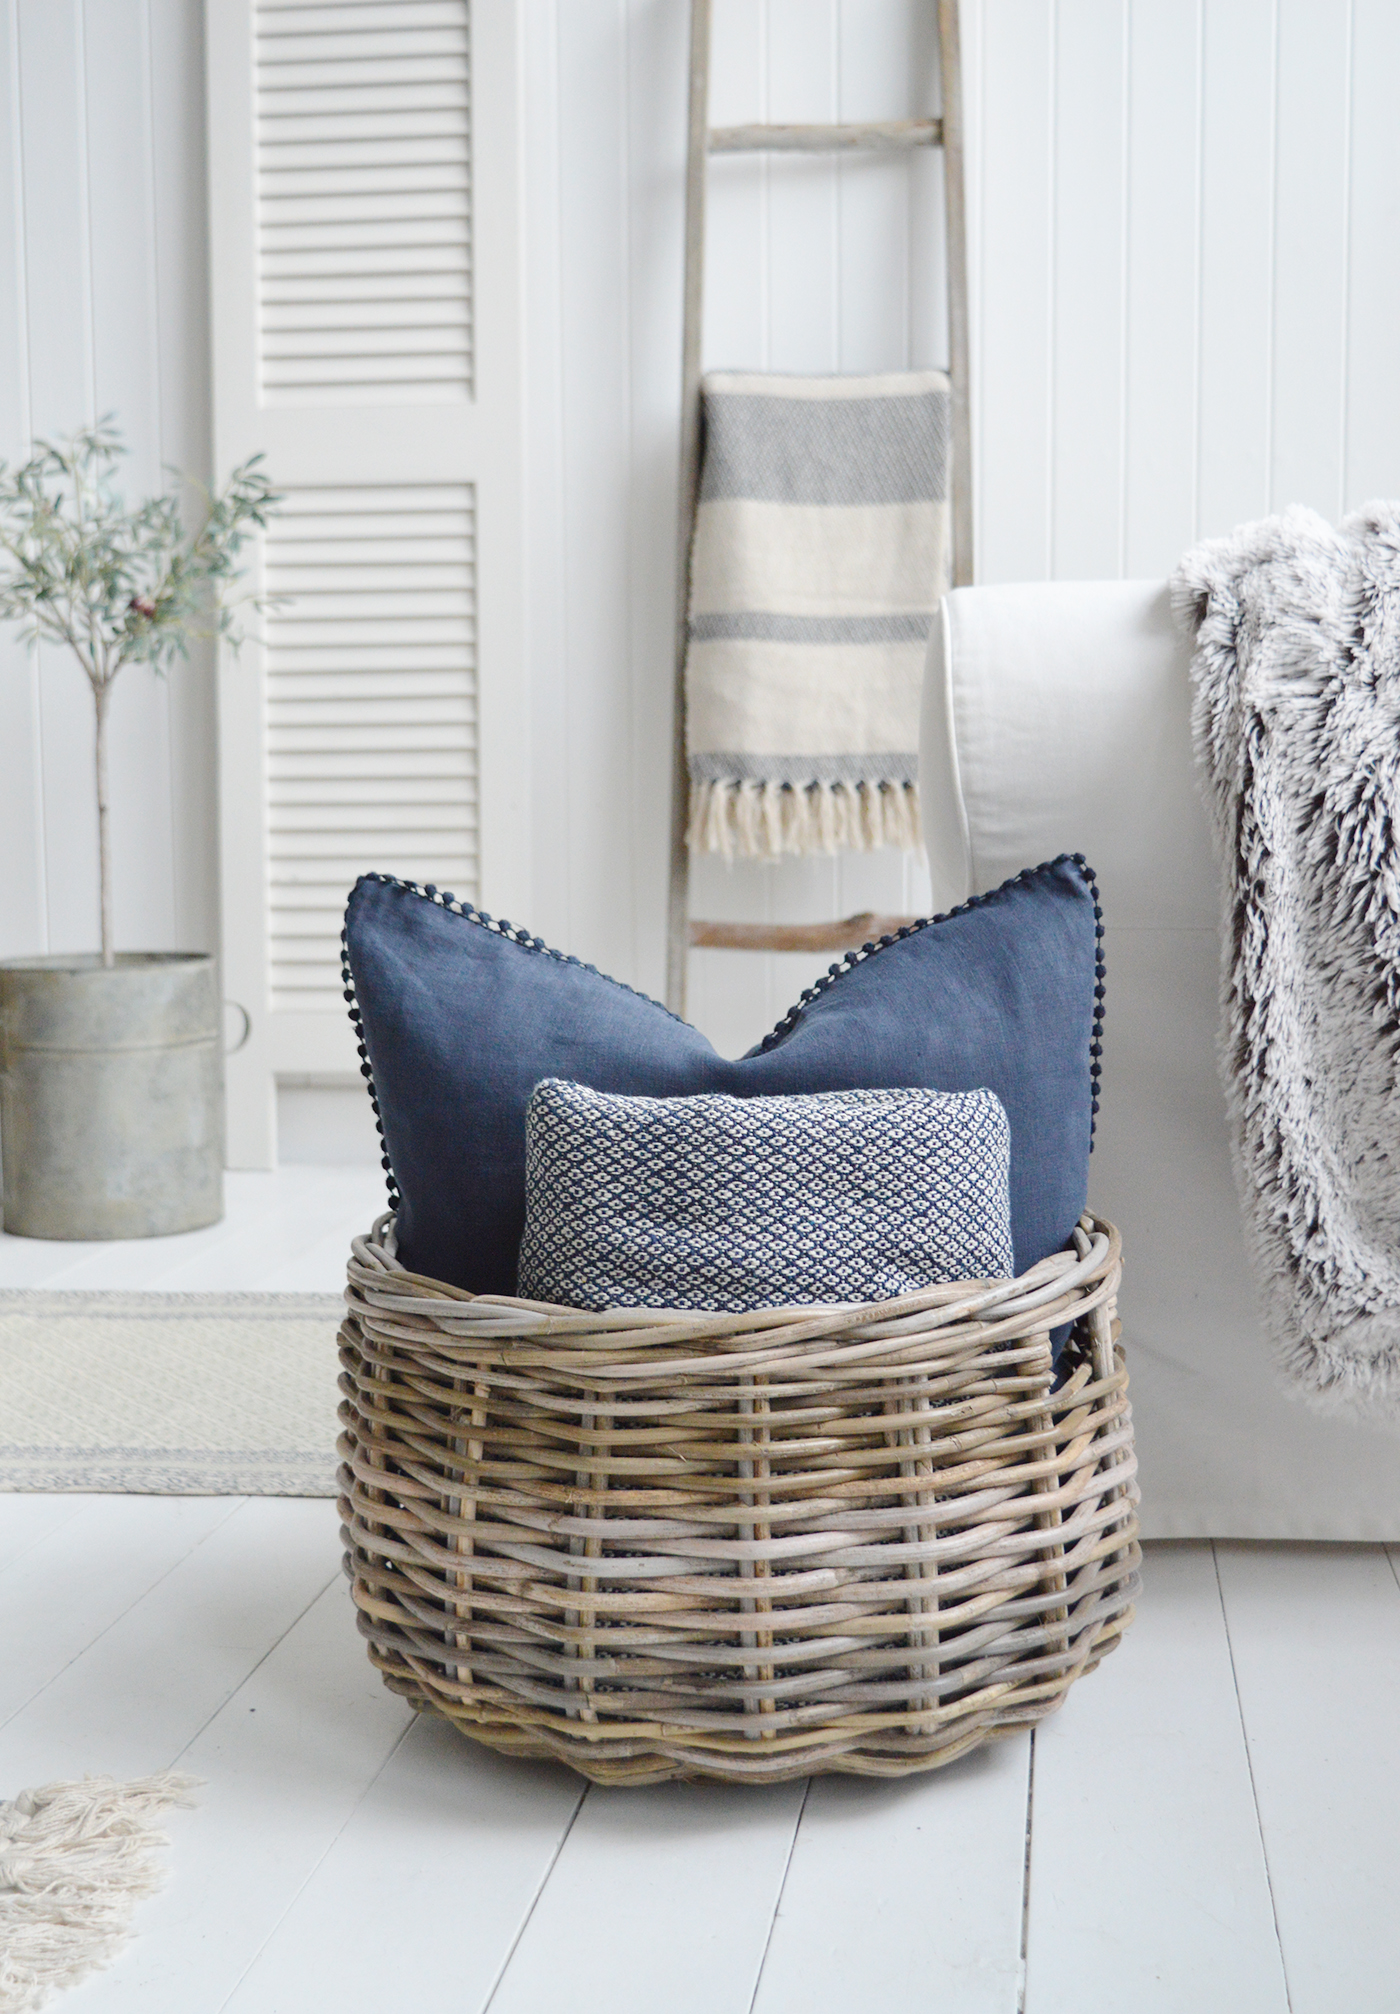 Casco Bay grey willow round basket with handles for logs, toys and everyday storage from The White Lighthouse Furniture and Home Interiors for New England, country, coastal and city homes for hallway, living room, bedroom and bathroom